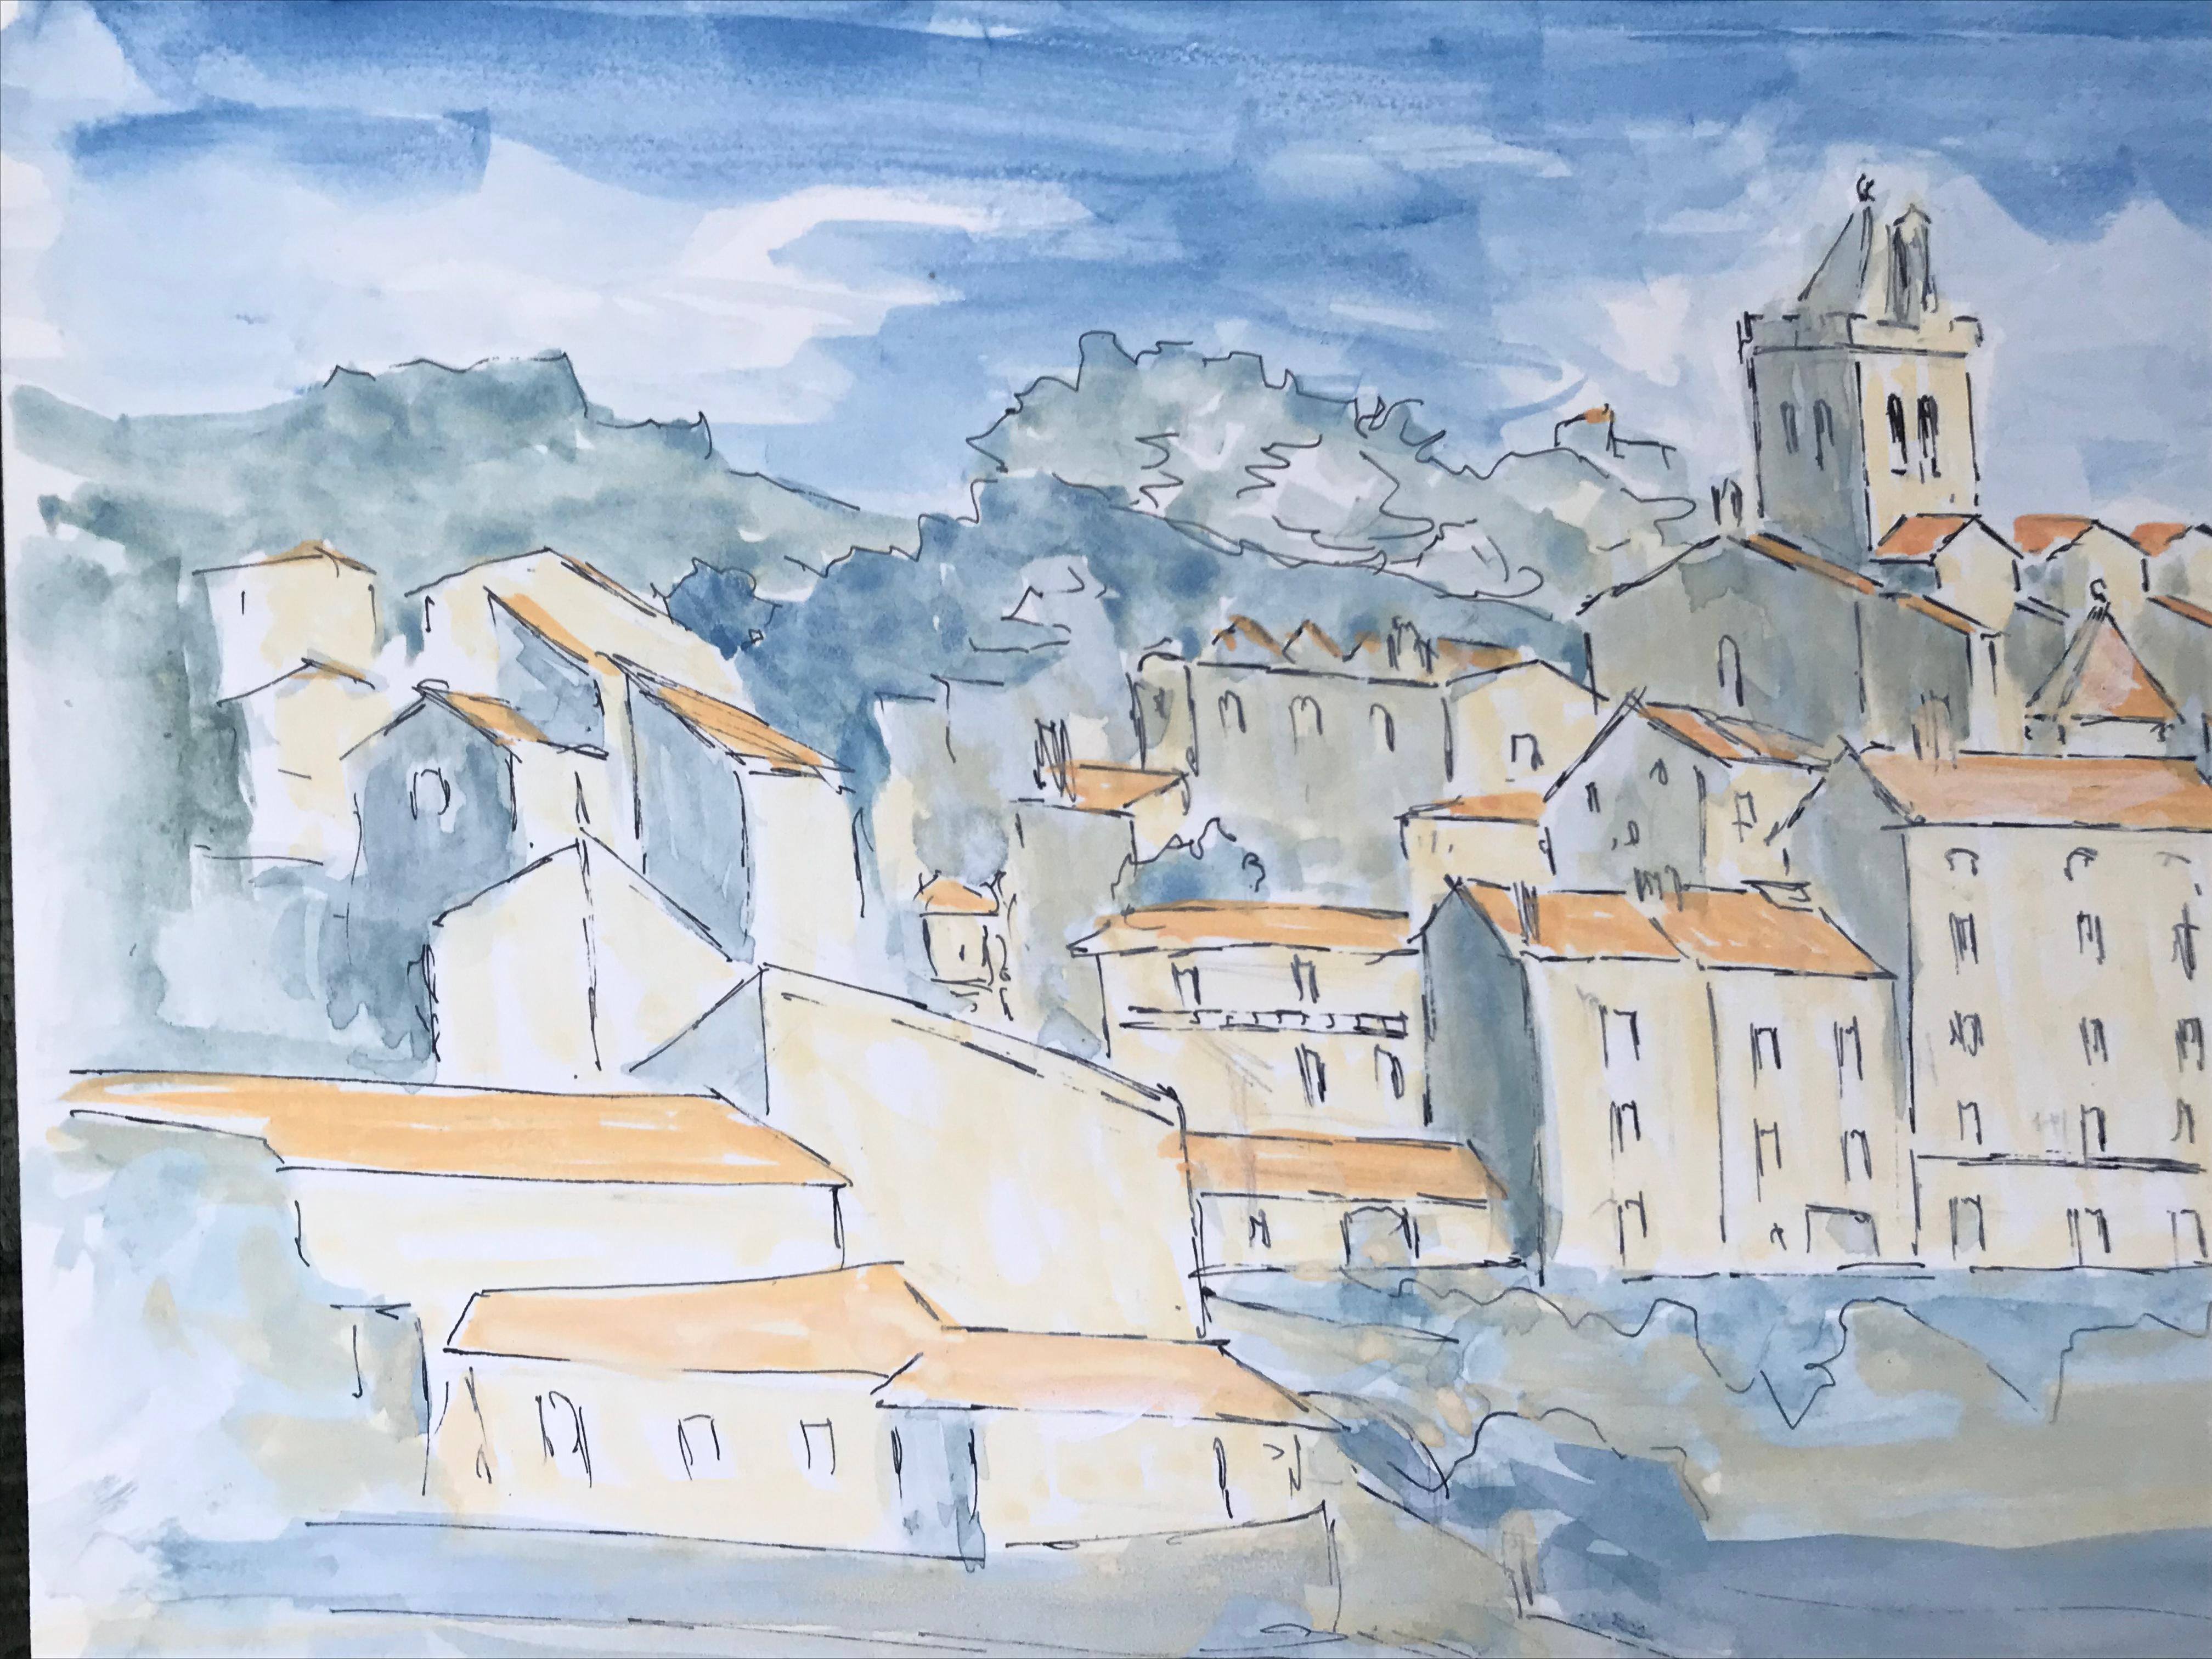 French Landscape
by Bernard Labbe (French mid 20th century)
original watercolour on artist paper, unframed
size: 8.25 x 11.75 inches
condition: very good and ready to be enjoyed. 

provenance: the artists atelier/ studio, France (stamped verso)